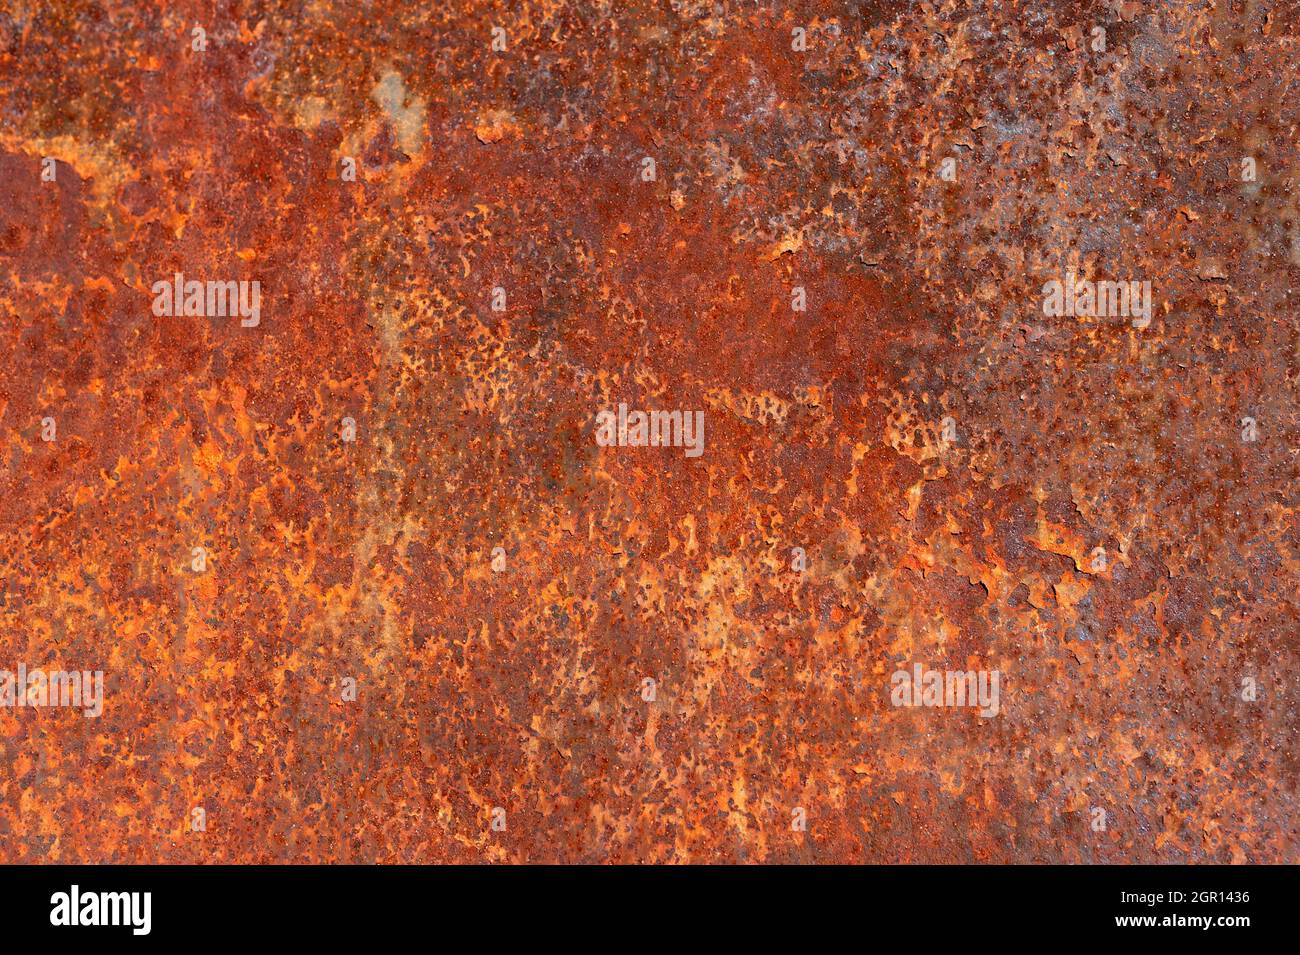 Rusty old surface Stock Photo